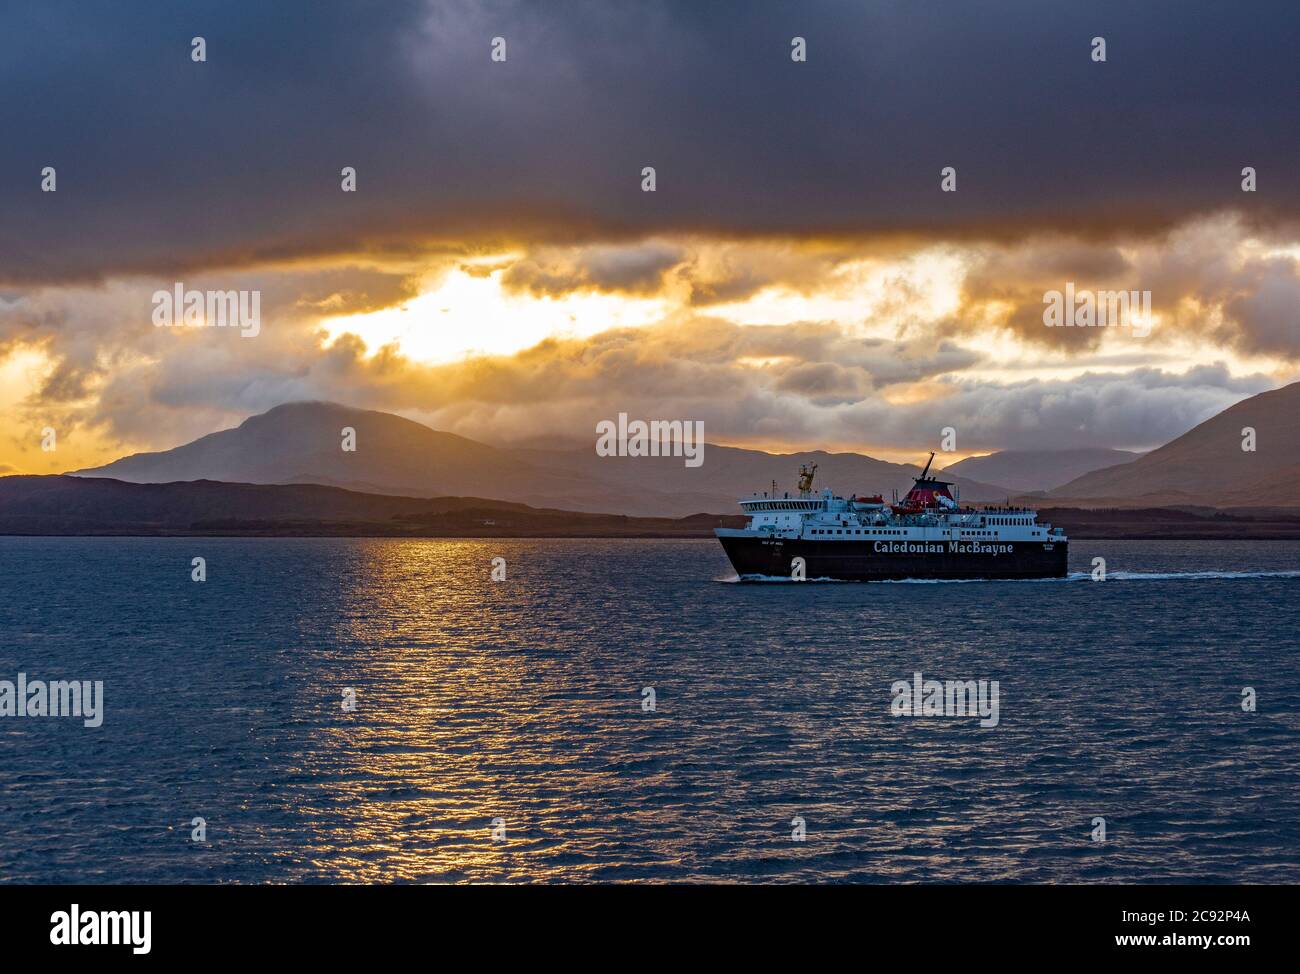 Caledonian MacBrayne ferry on the Sound of Mull. Storm clouds and showers on the Isle of Mull, Scottish Inner Hebrides near Oban, Argyll and Bute. Stock Photo